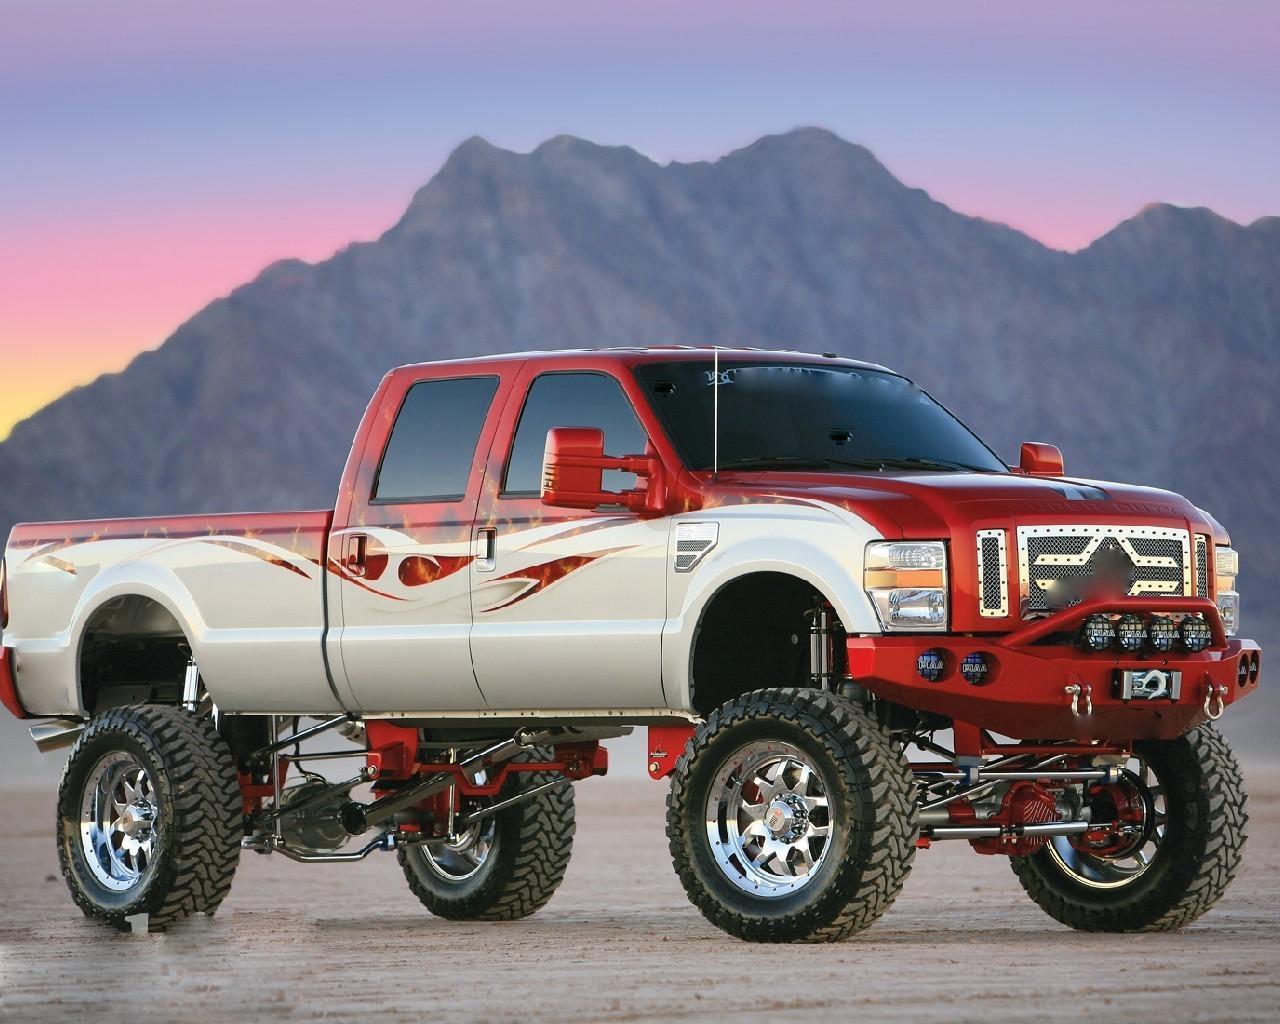 Ford F350 Wallpapers - Wallpaper Cave